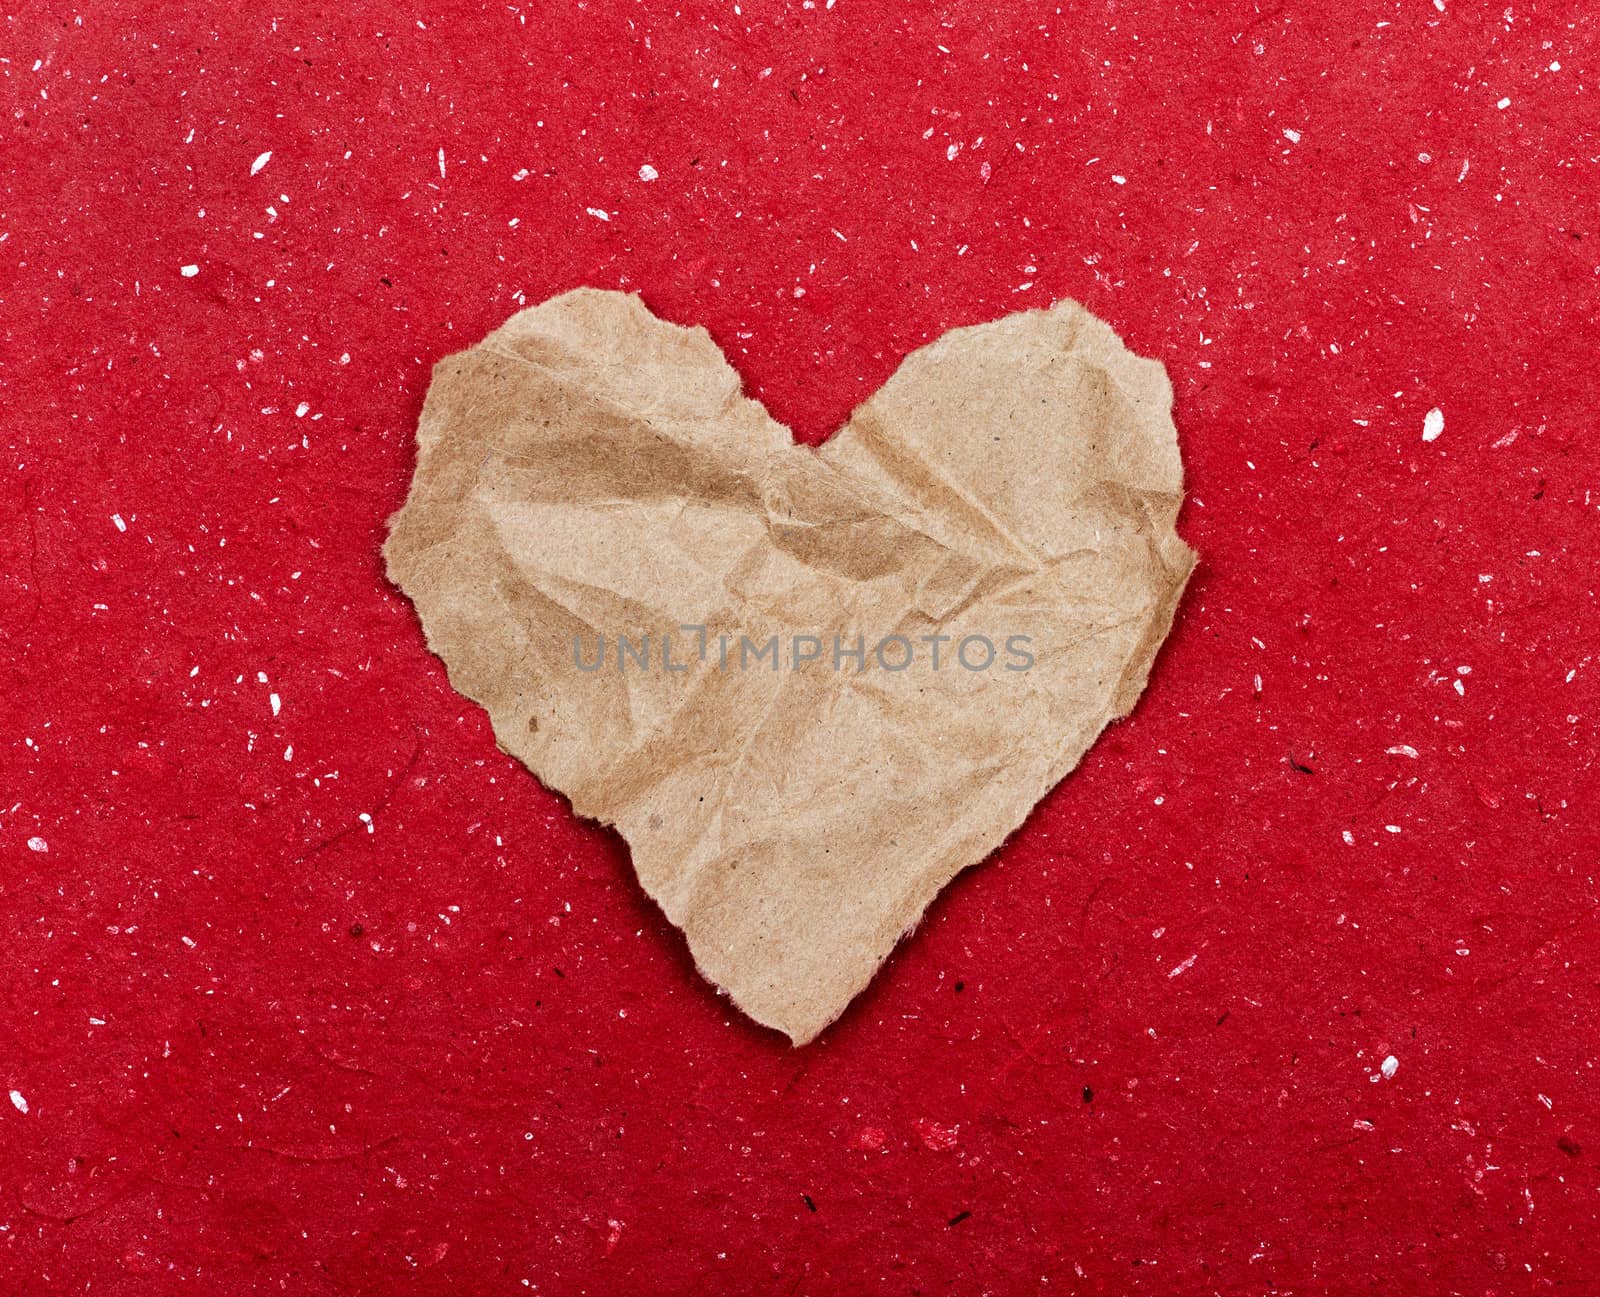 Torn paper heart on a red background